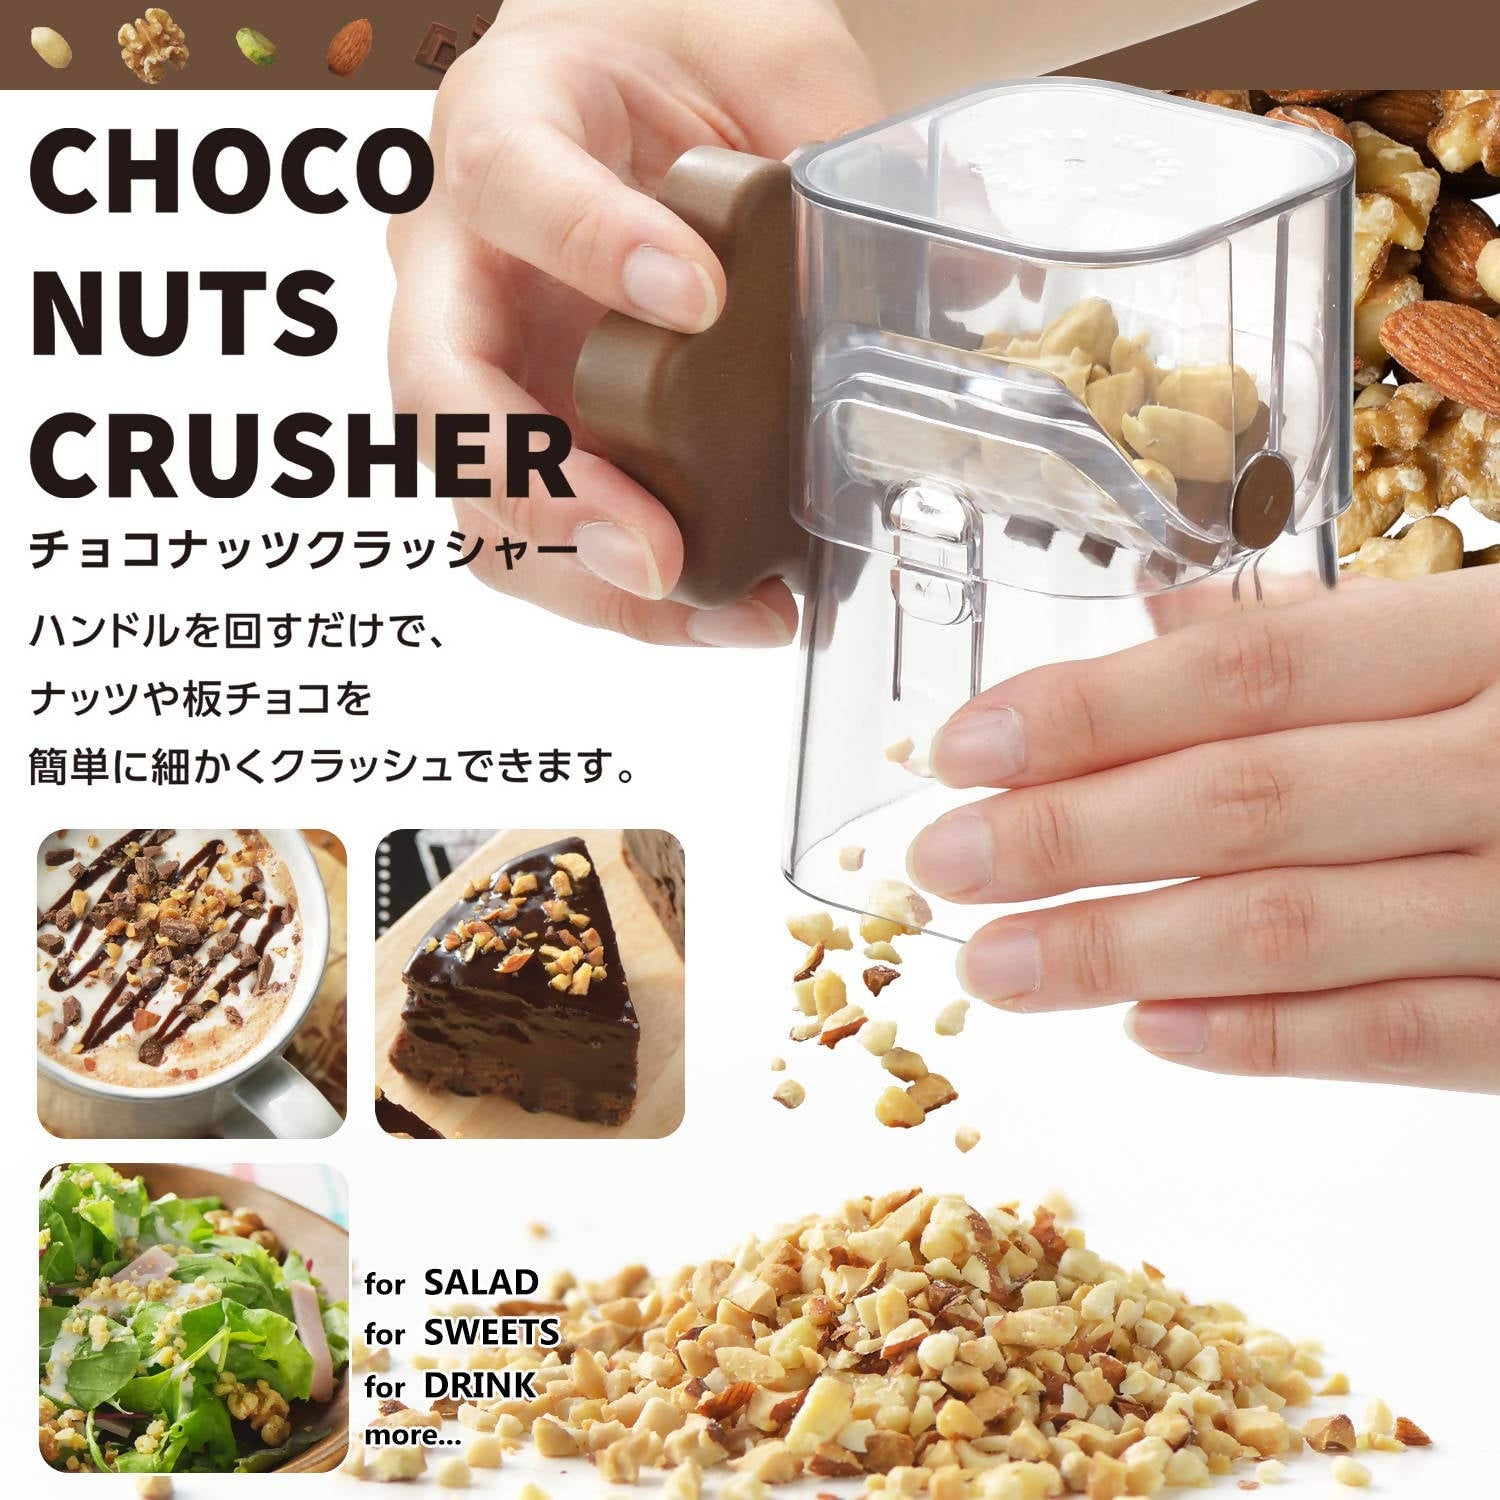 Choco Nut Crusher SE-2511 – New Japanese Invention Featured on NHK